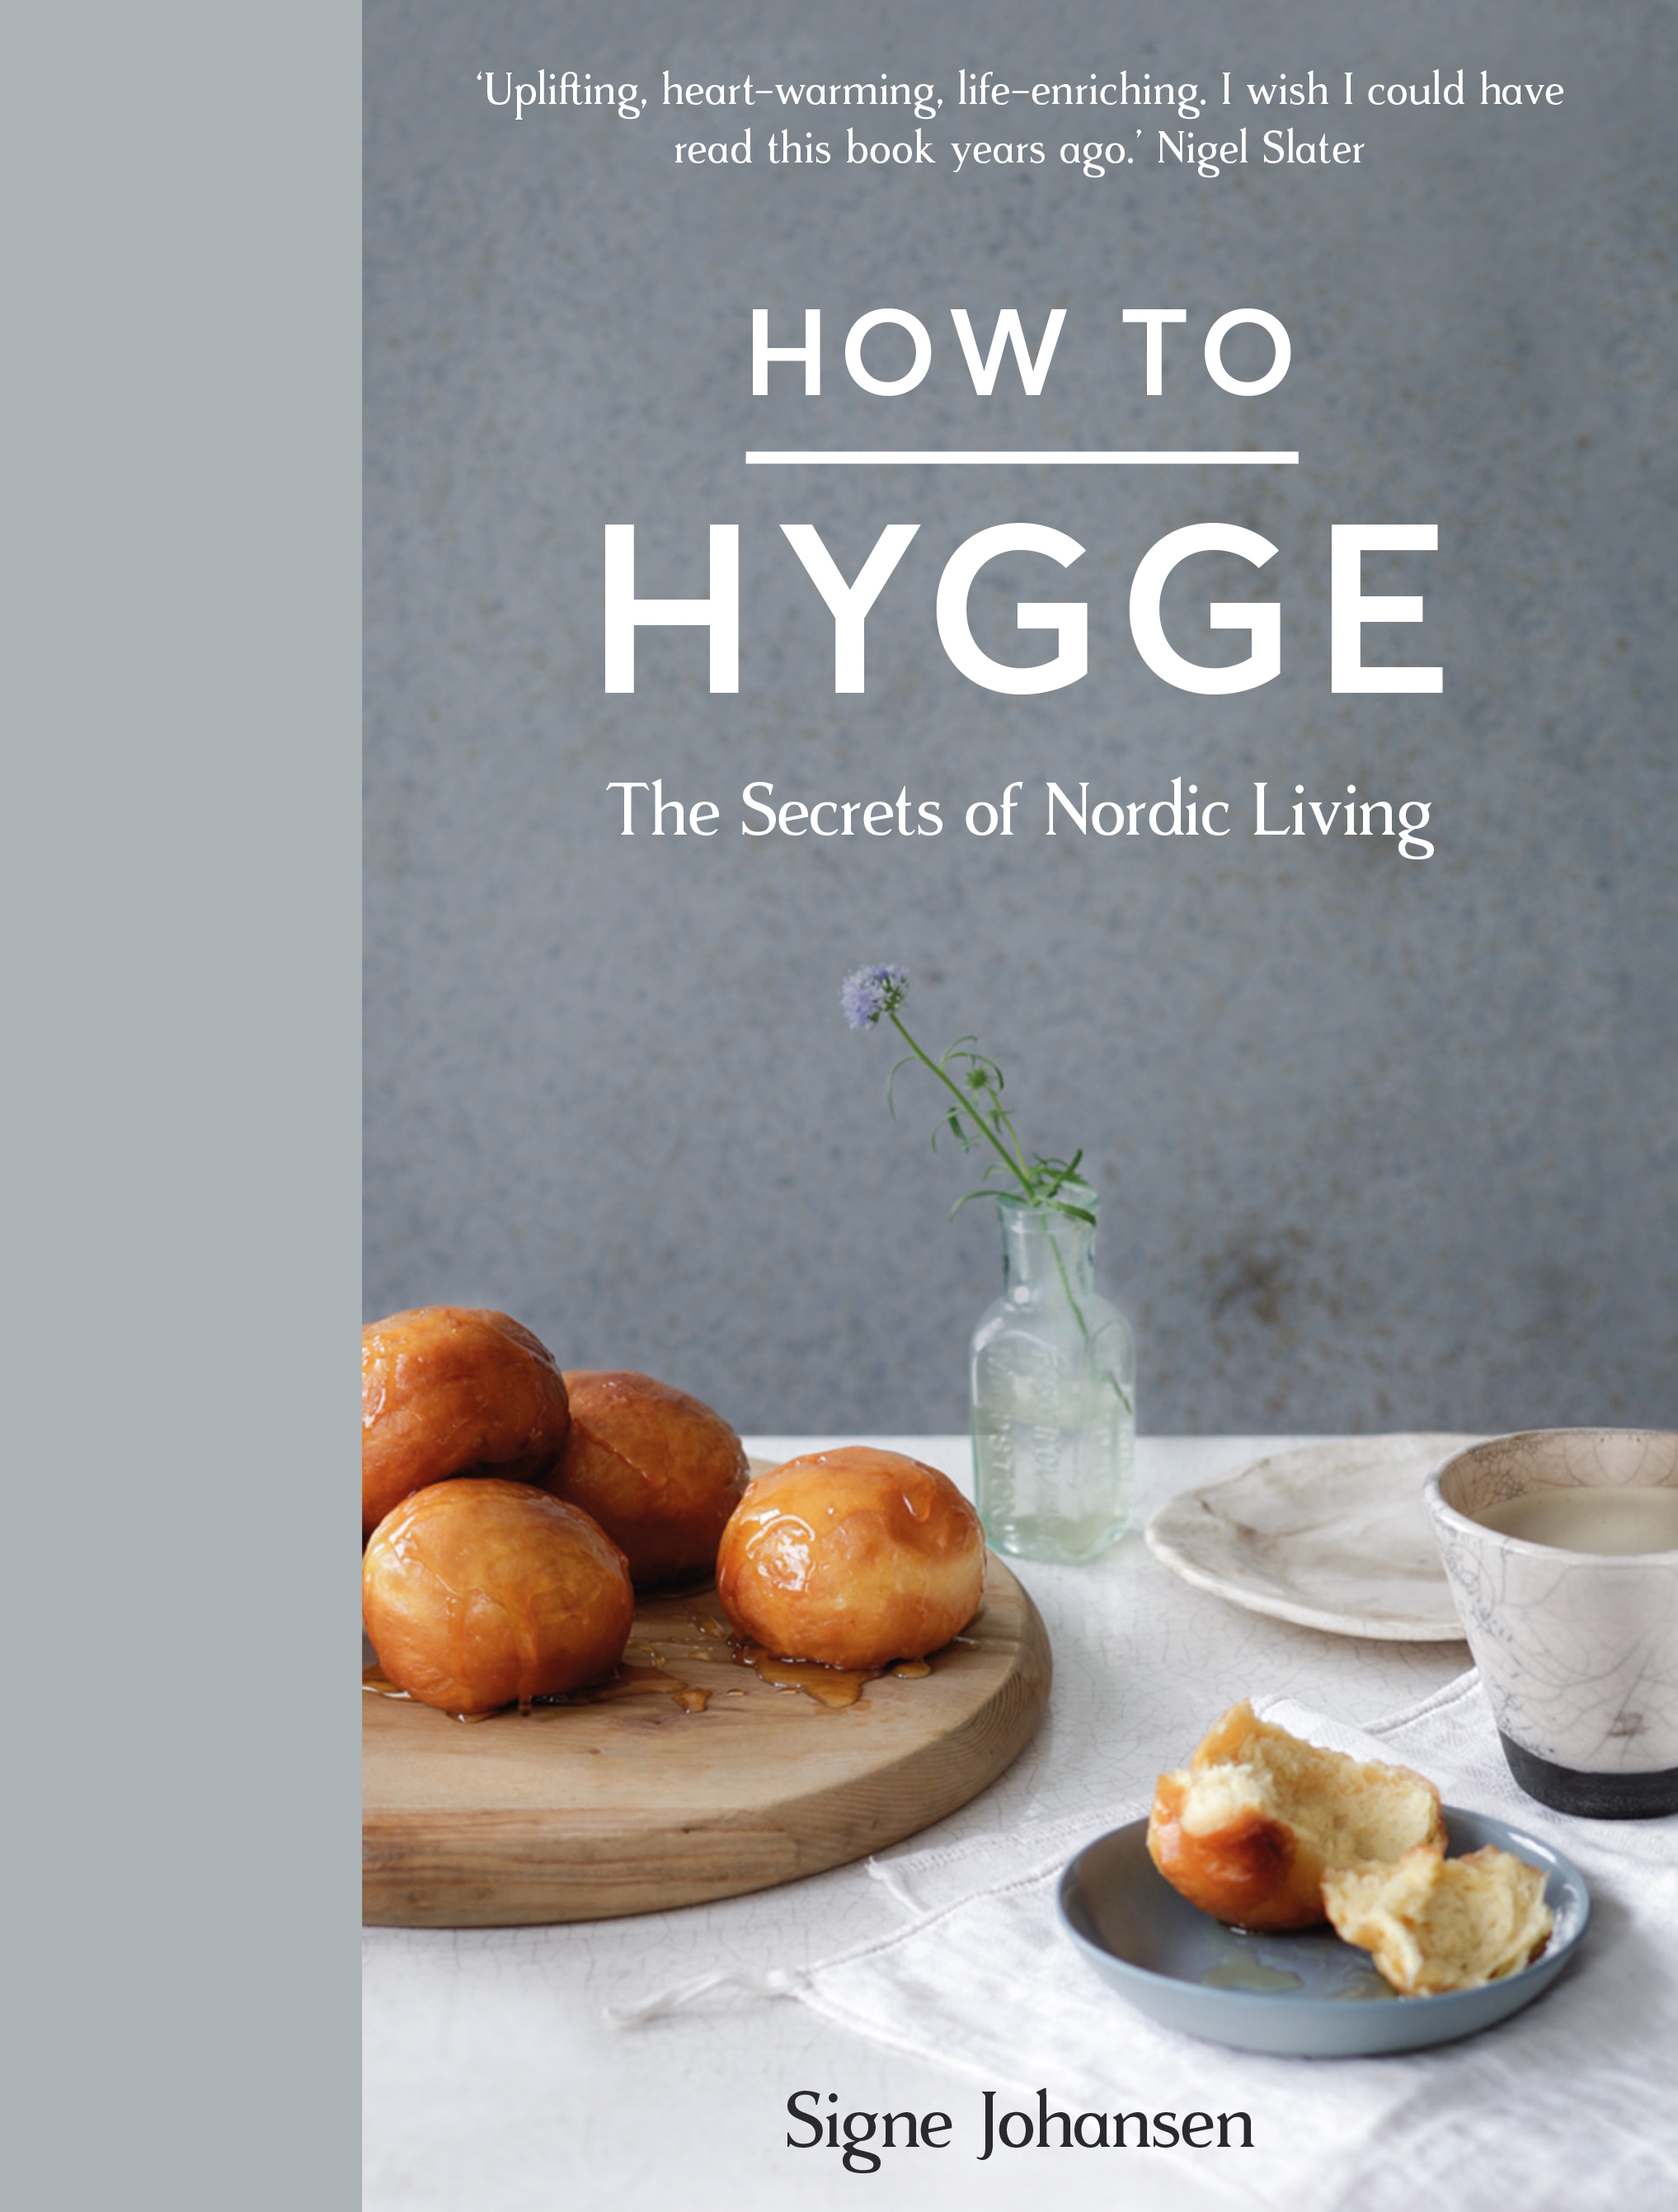 HOW TO HYGGE : THE SECRETS OF NORDIC LIVING